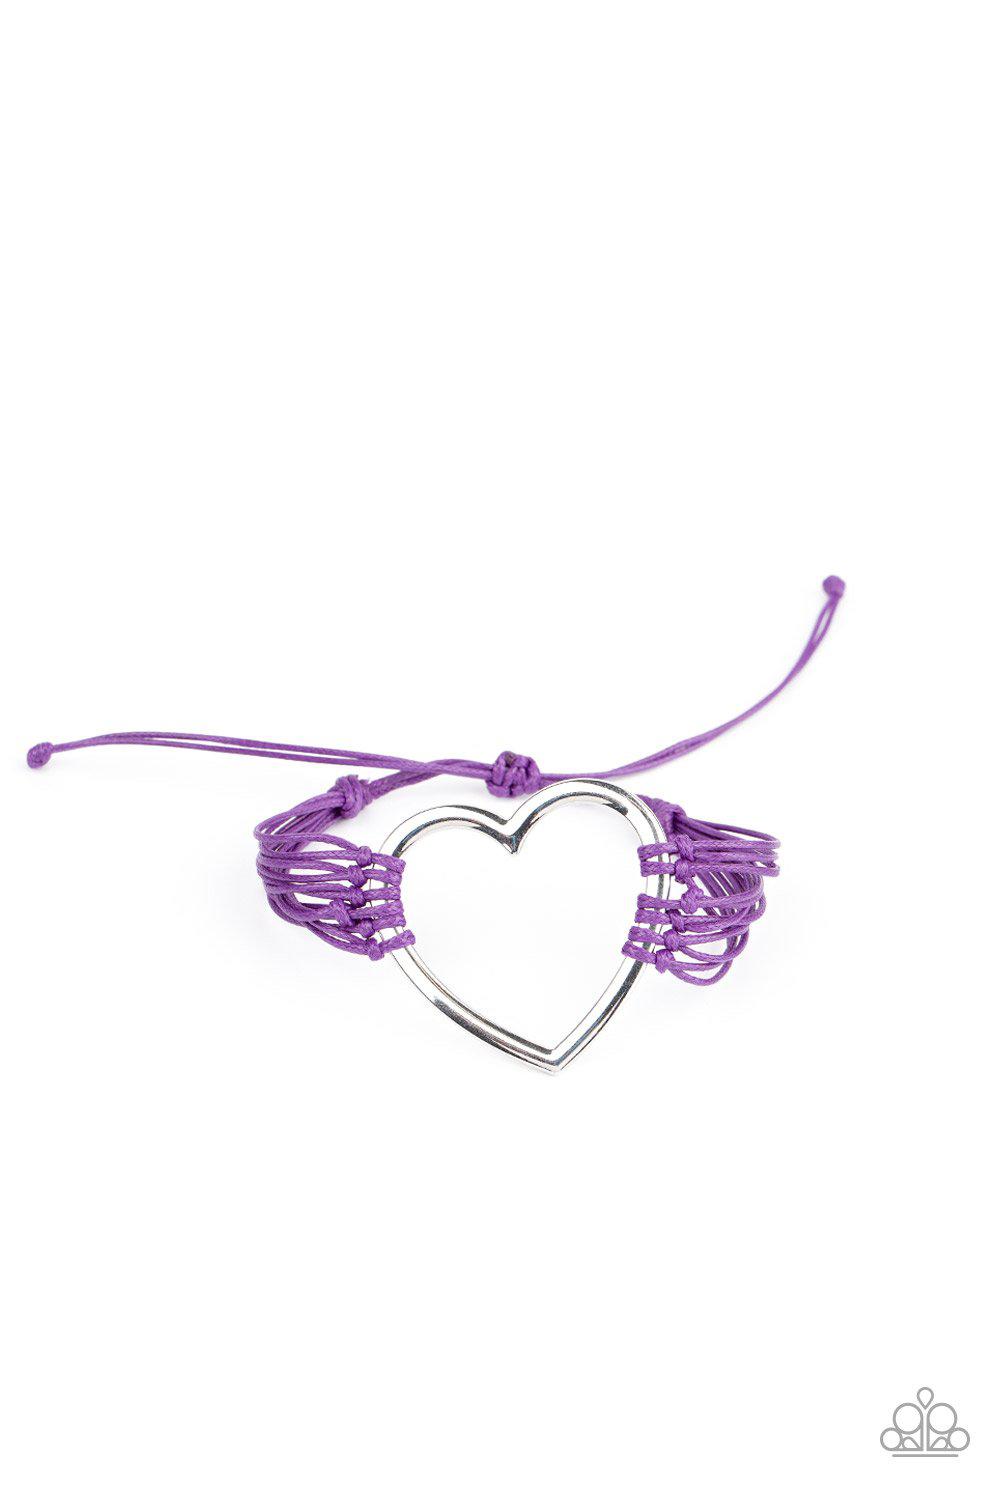 Playing With My HEARTSTRINGS Purple and Silver Heart Charm Urban Knot Bracelet - Paparazzi Accessories - lightbox -CarasShop.com - $5 Jewelry by Cara Jewels